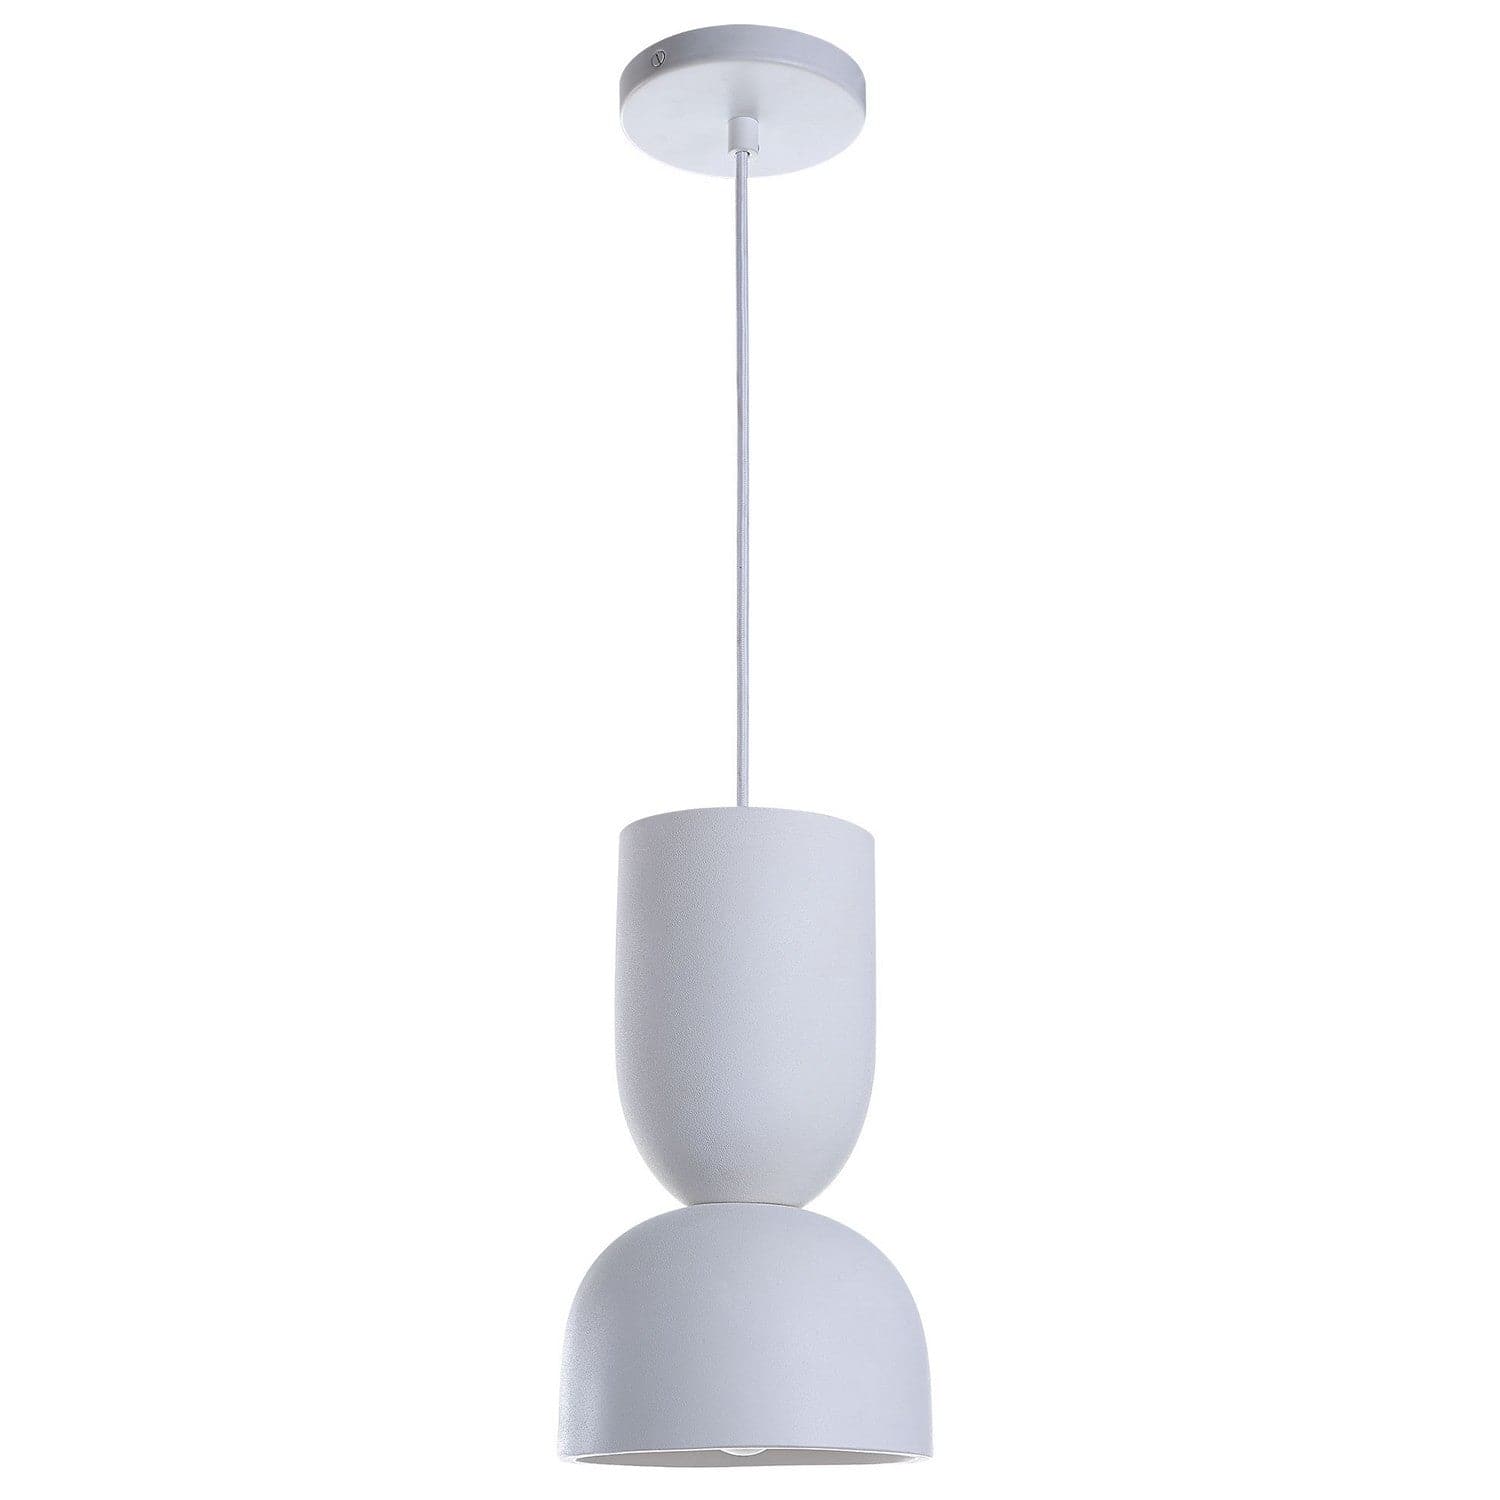 Renwil - LPC4456 - One Light Ceiling Fixture - Kala - White With Texture